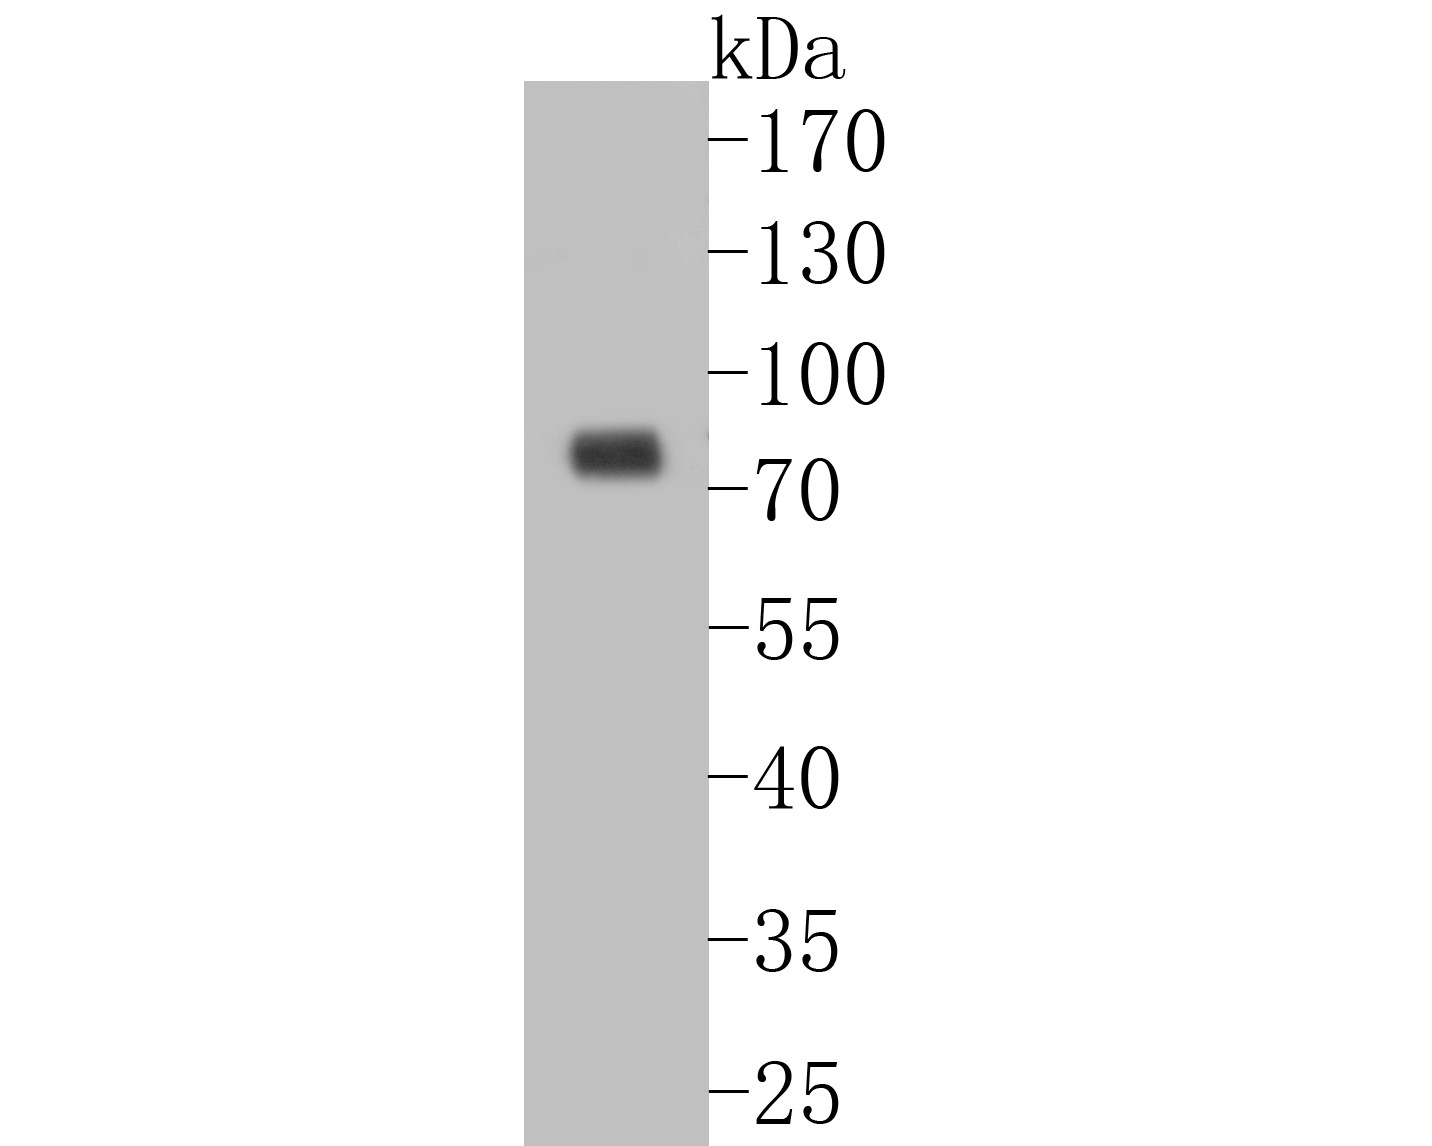 Western blot analysis of p63 on human skin tissue lysates. Proteins were transferred to a PVDF membrane and blocked with 5% BSA in PBS for 1 hour at room temperature. The primary antibody (ET7110-47, 1/500) was used in 5% BSA at room temperature for 2 hours. Goat Anti-Rabbit IgG - HRP Secondary Antibody (HA1001) at 1:5,000 dilution was used for 1 hour at room temperature.